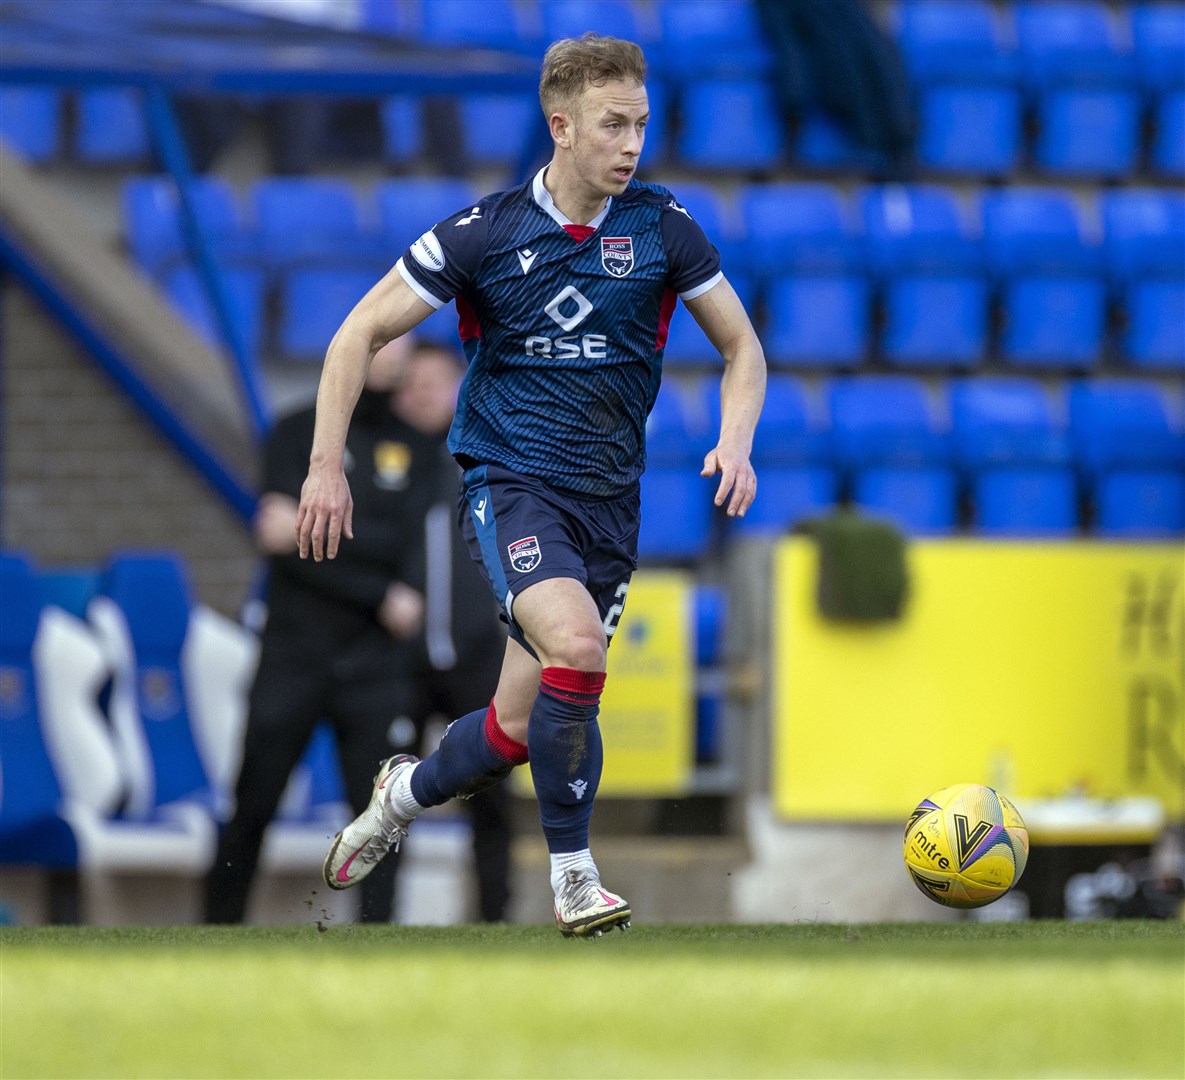 Picture - Ken Macpherson, Inverness. St. Johnstone(1) v Ross County(?0). 20.03.21. Ross County's Harry Paton.